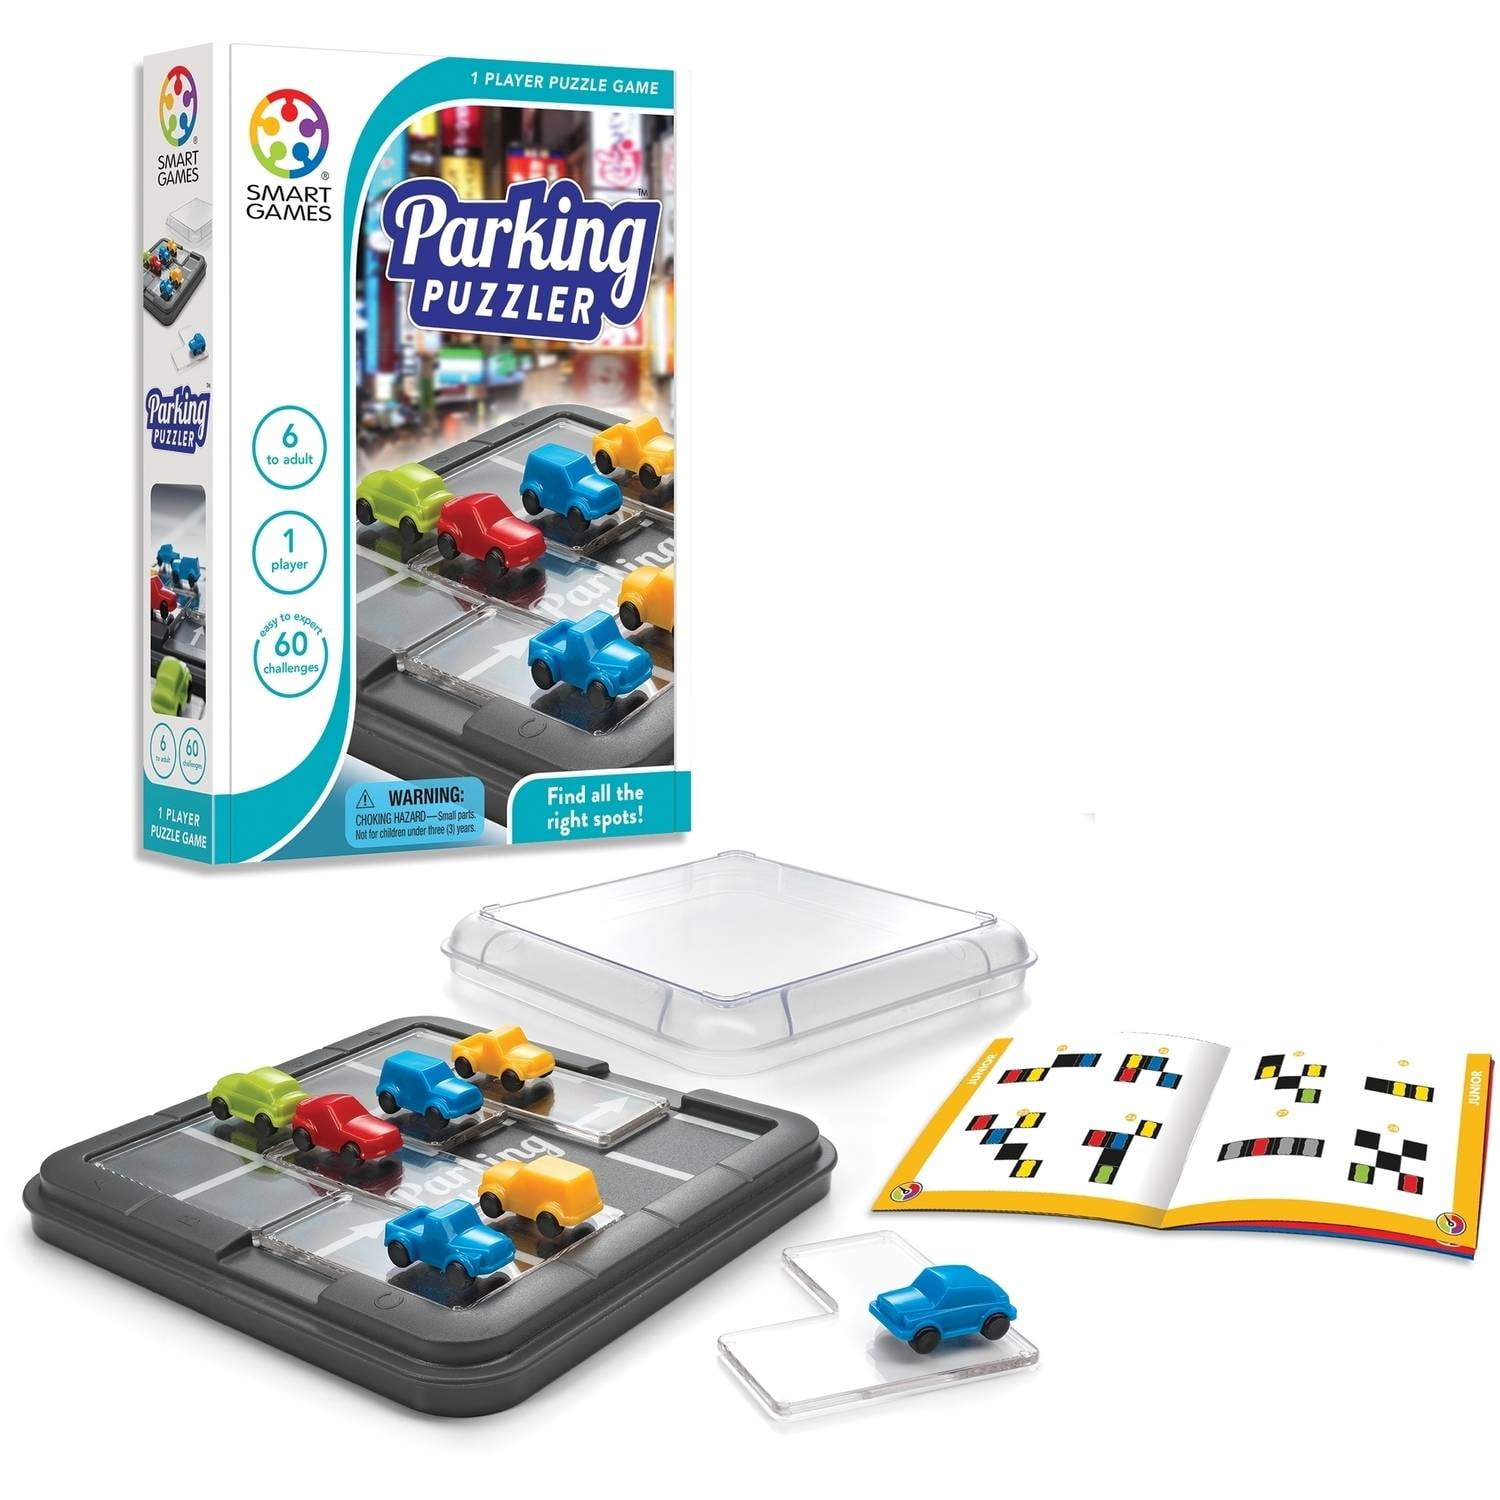 Smart Games IQ Puzzler Link Sg477 Travel Game From 6 Years 1 Players for sale online 